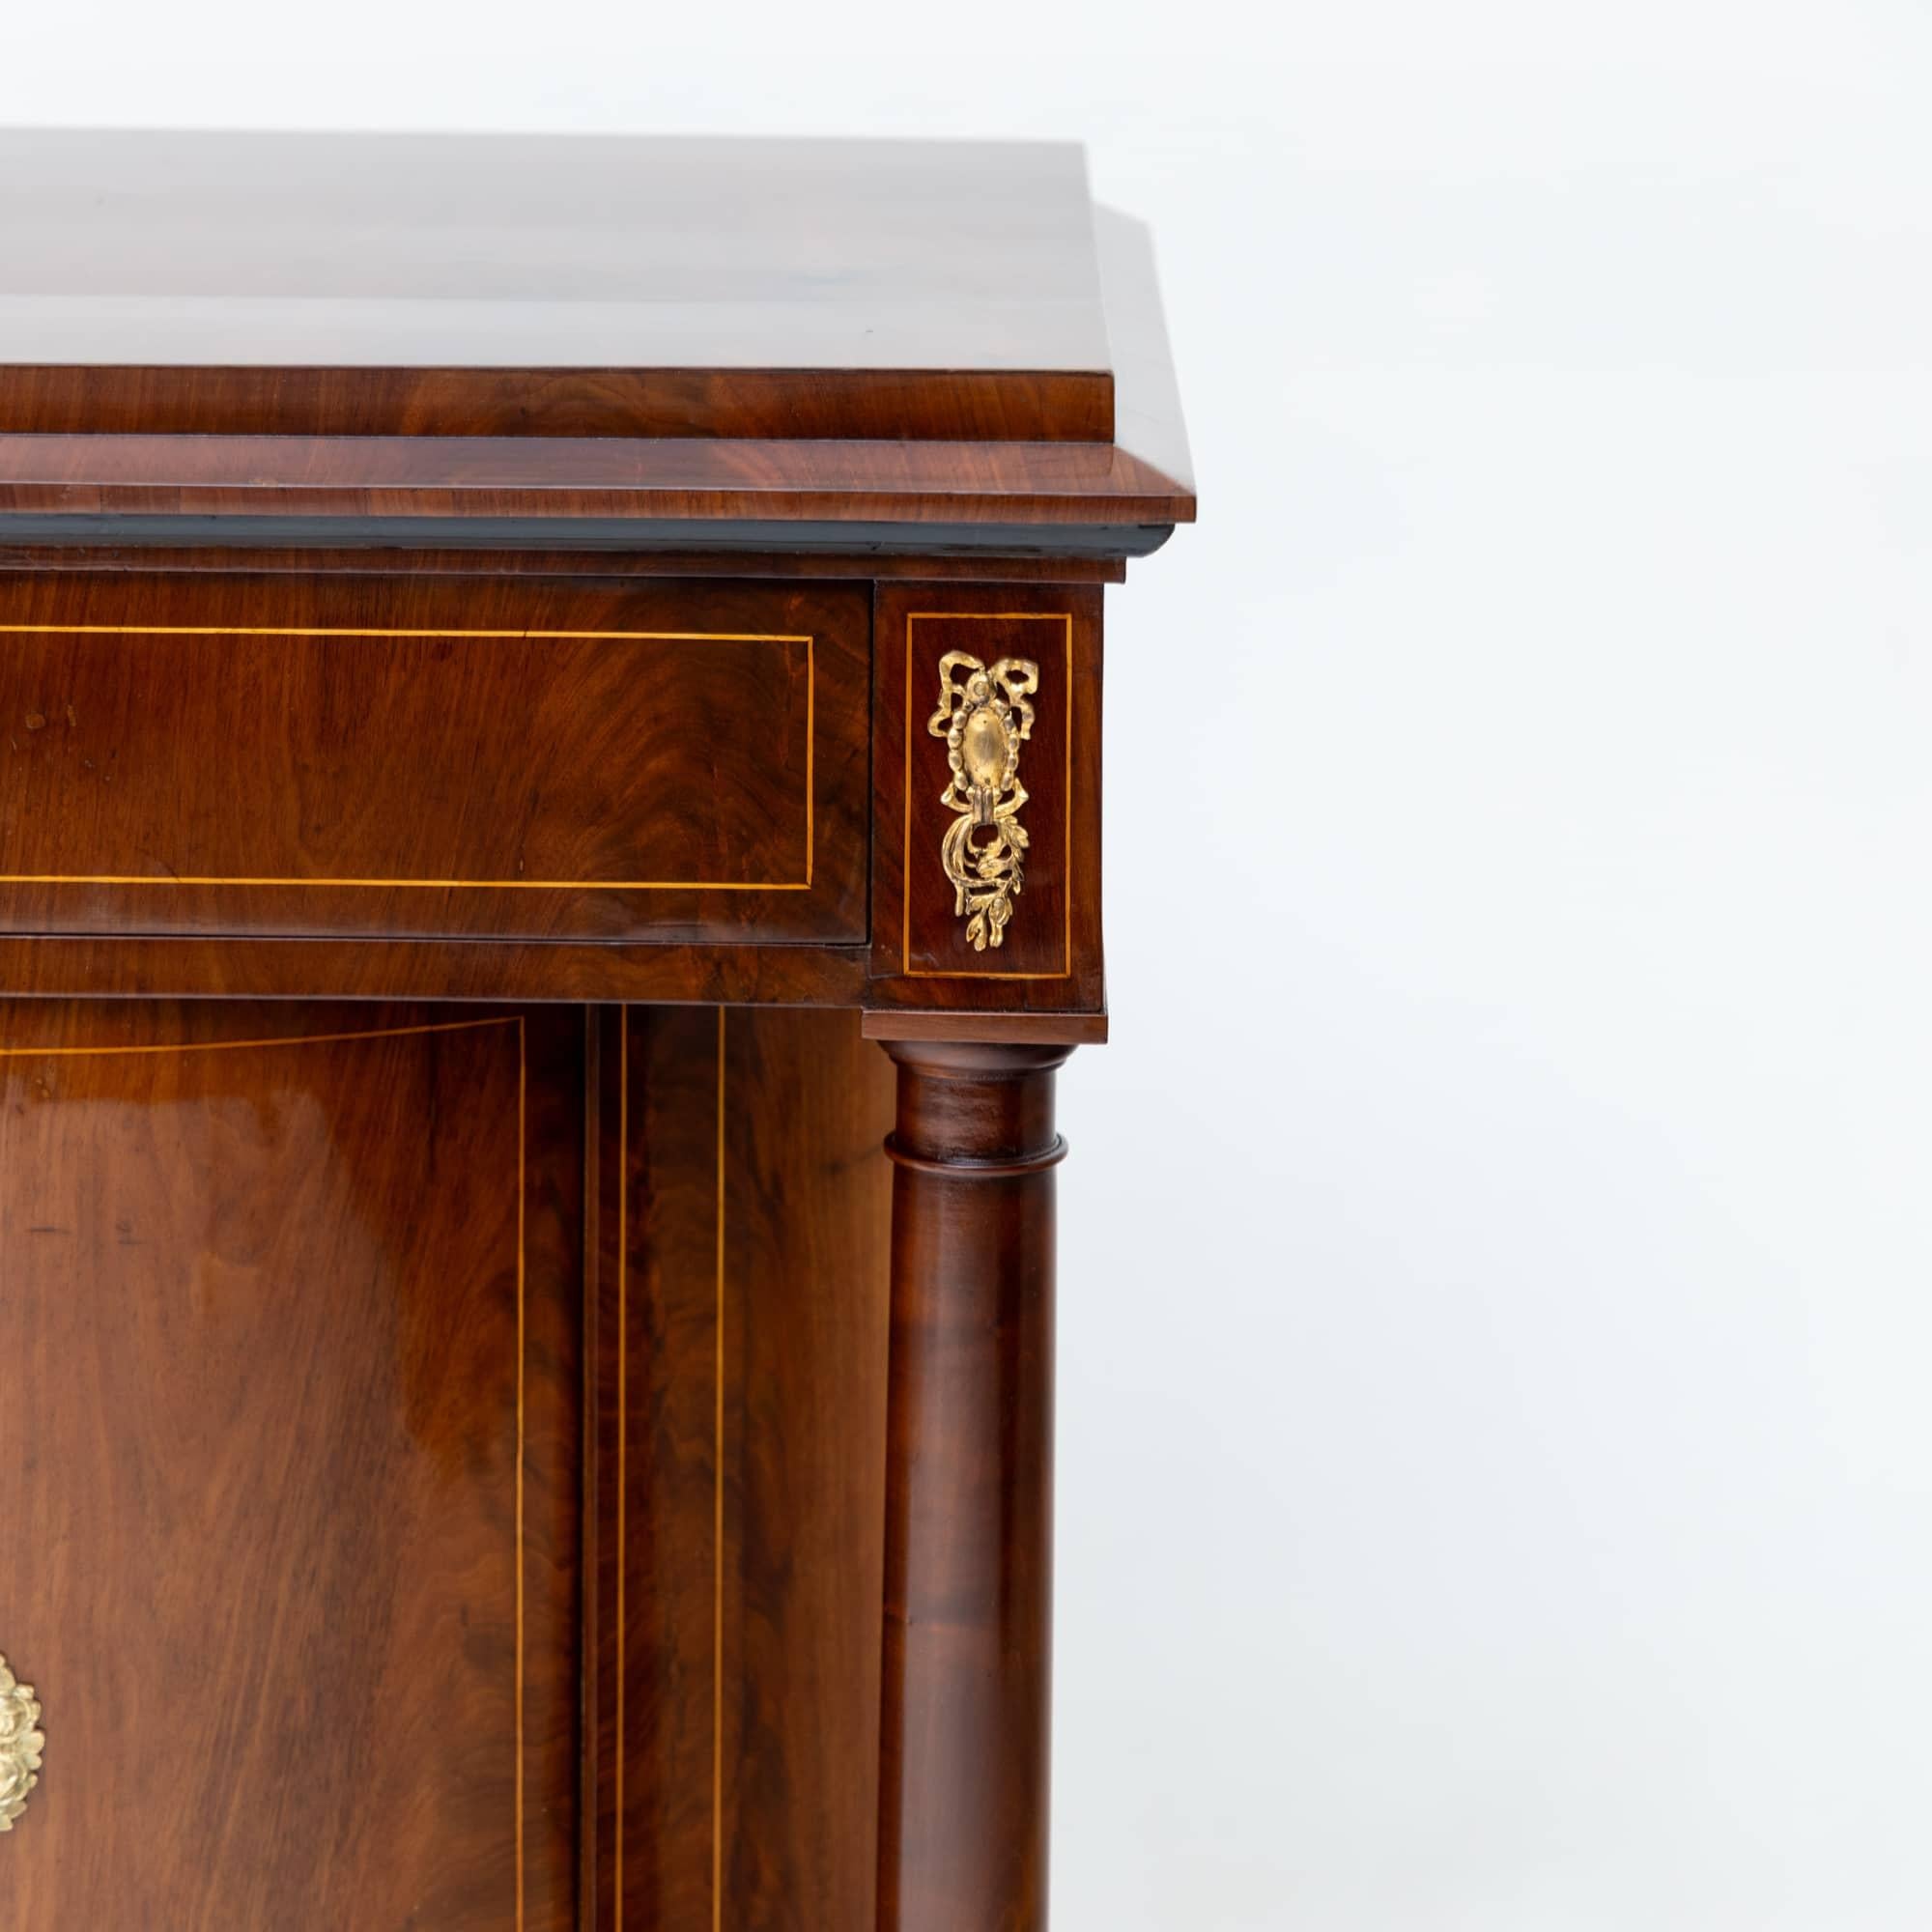 Mahogany veneered half cupboard with fine thread inlays and bronze applications. The half cupboard stands on low square feet and above a plinth drawer rises the semi-circular corpus with a door and flanking solid columns. The top is formed by